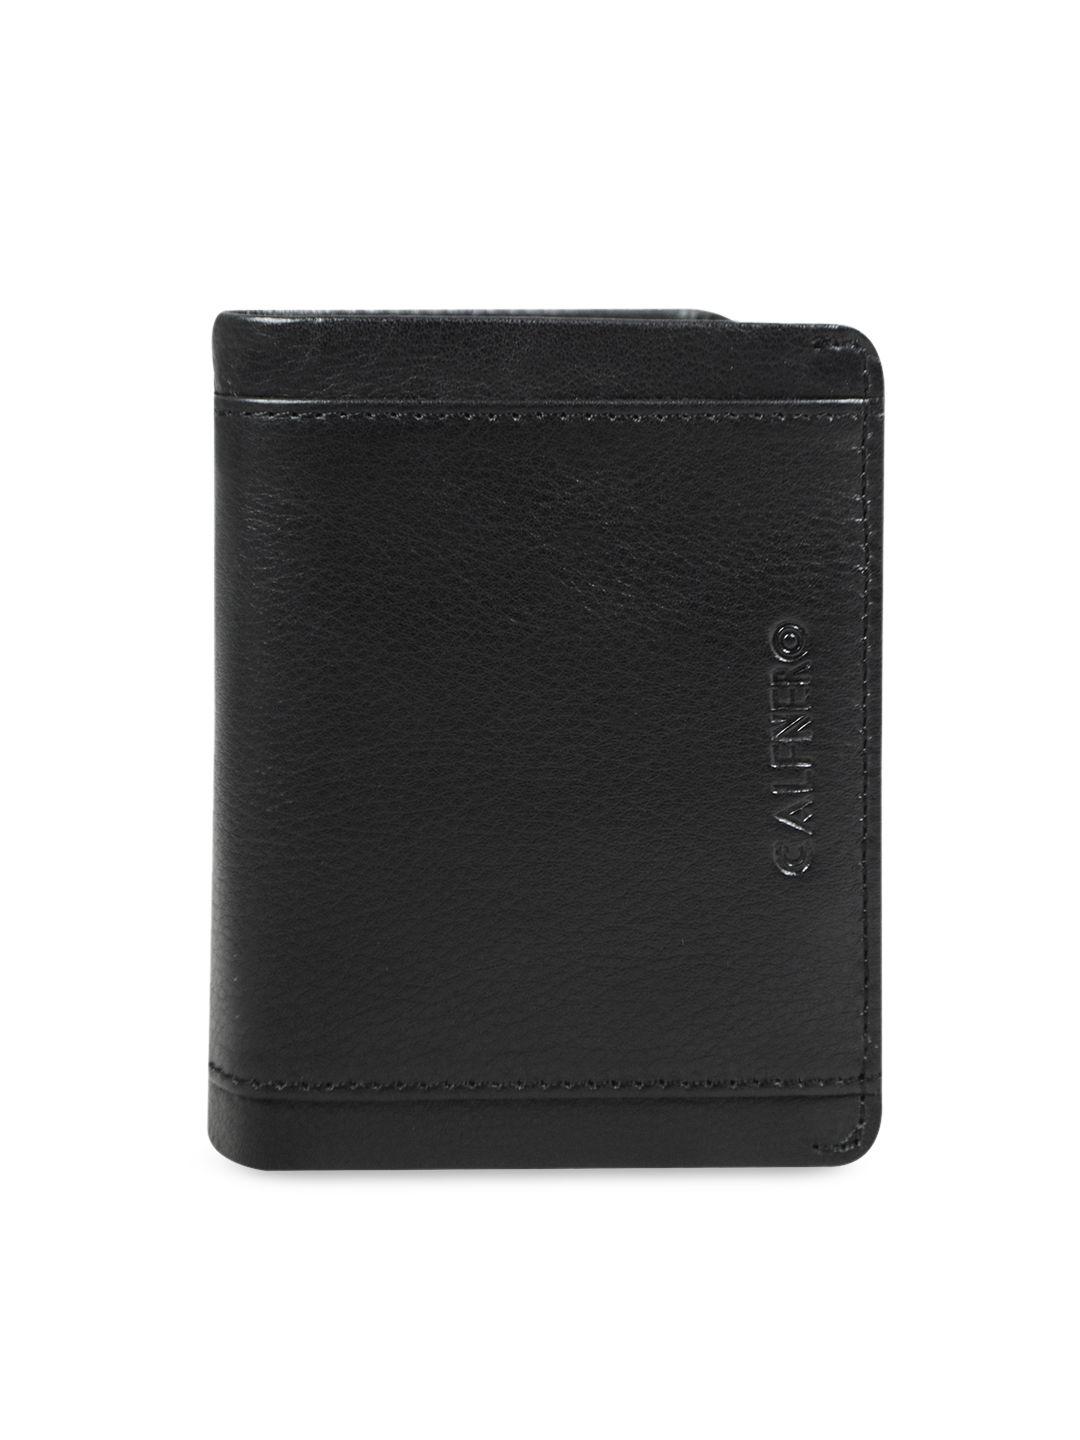 calfnero men black textured leather two fold wallet